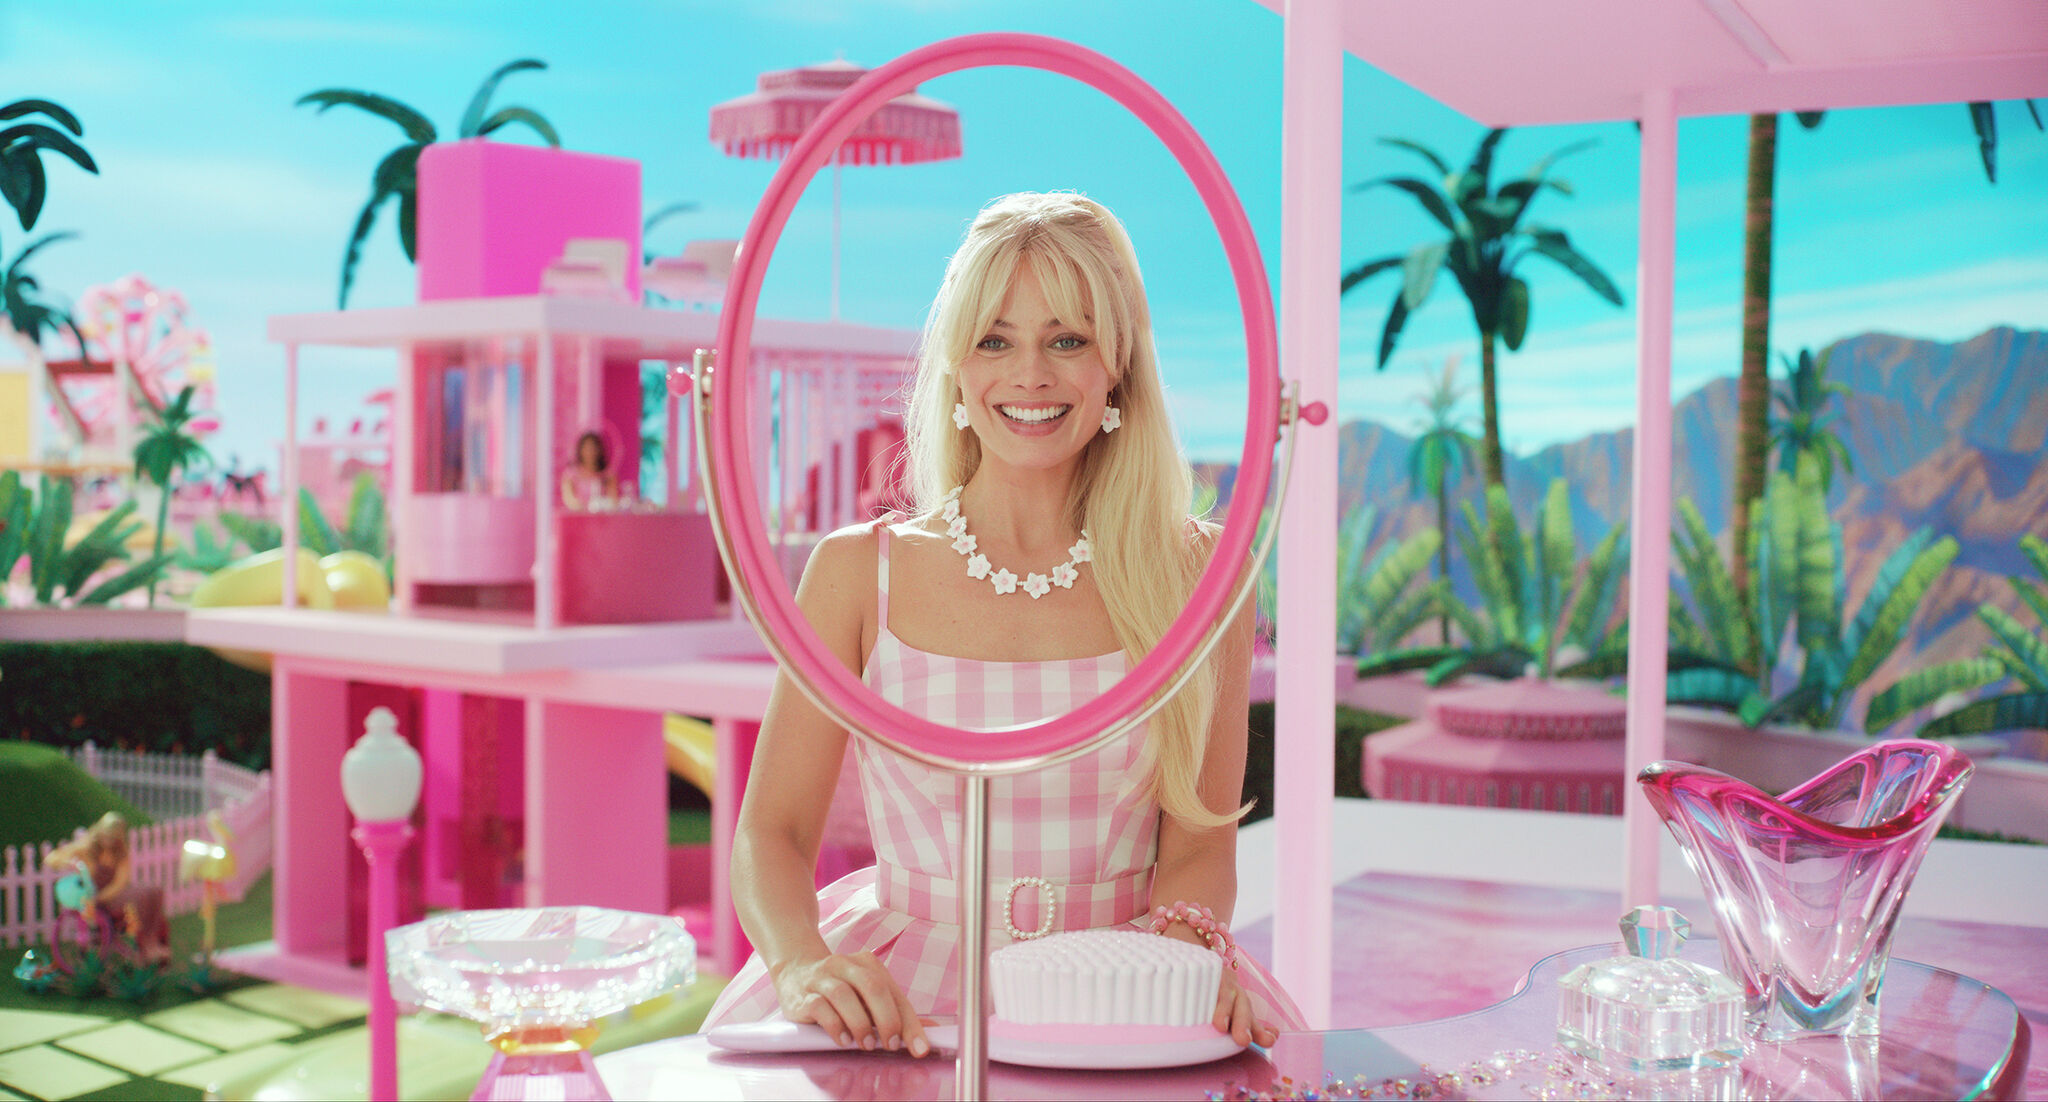 Barbie San Diego: Things to do that are Barbie-themed after movie